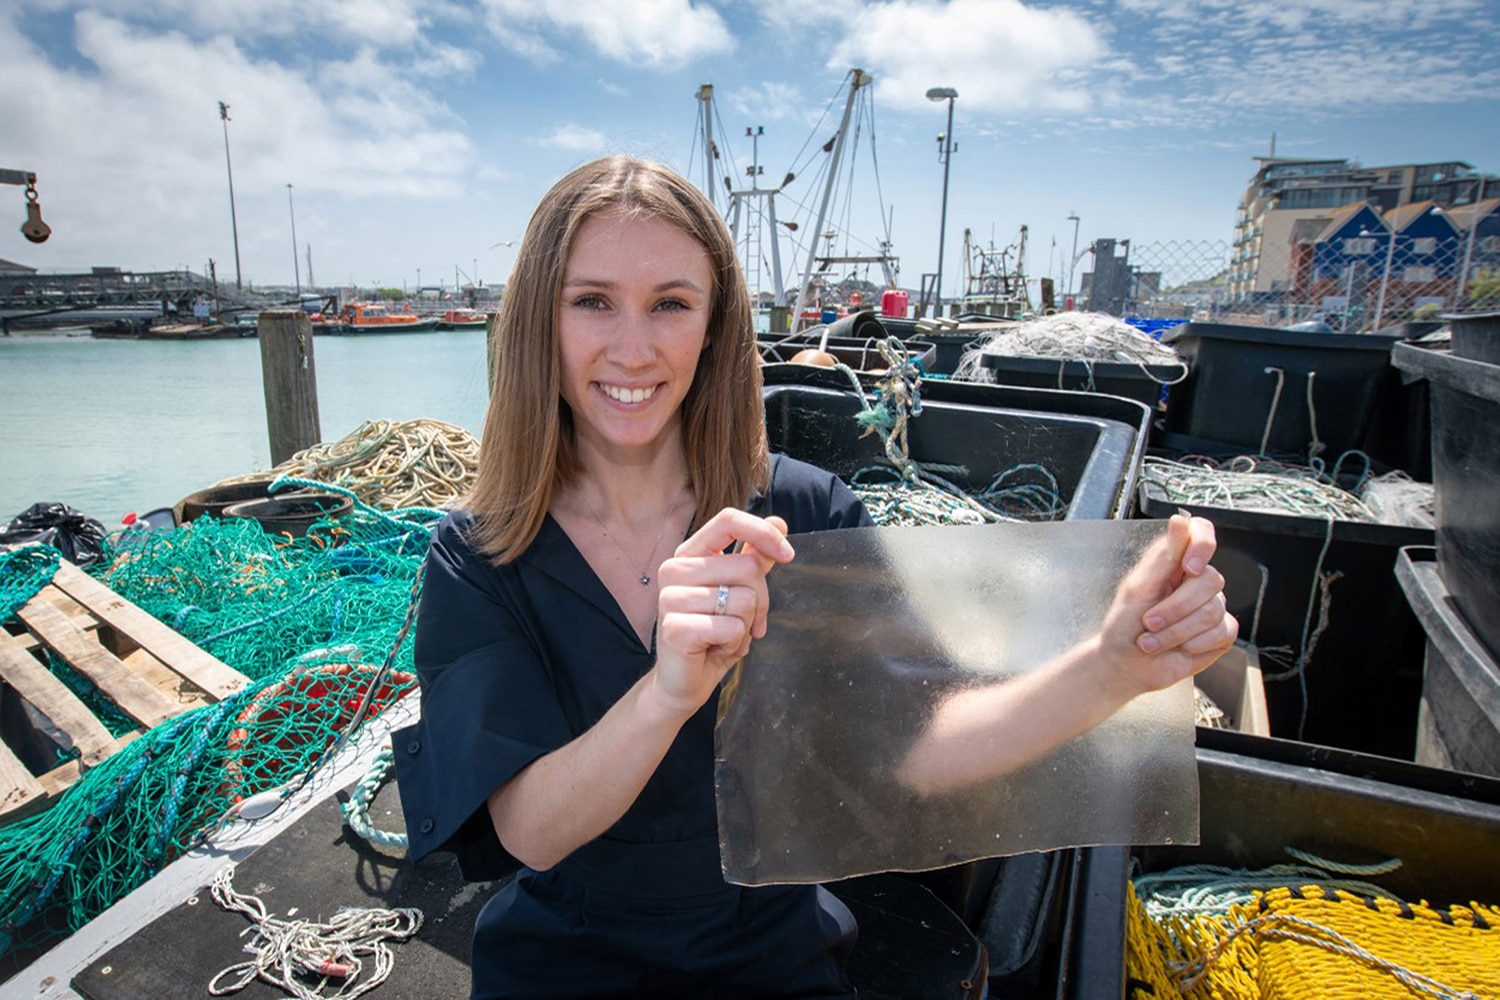 Product design student Lucy Hughes has invented a bioplastic created from fish skin and scales and red algae. Credit: University of Sussex